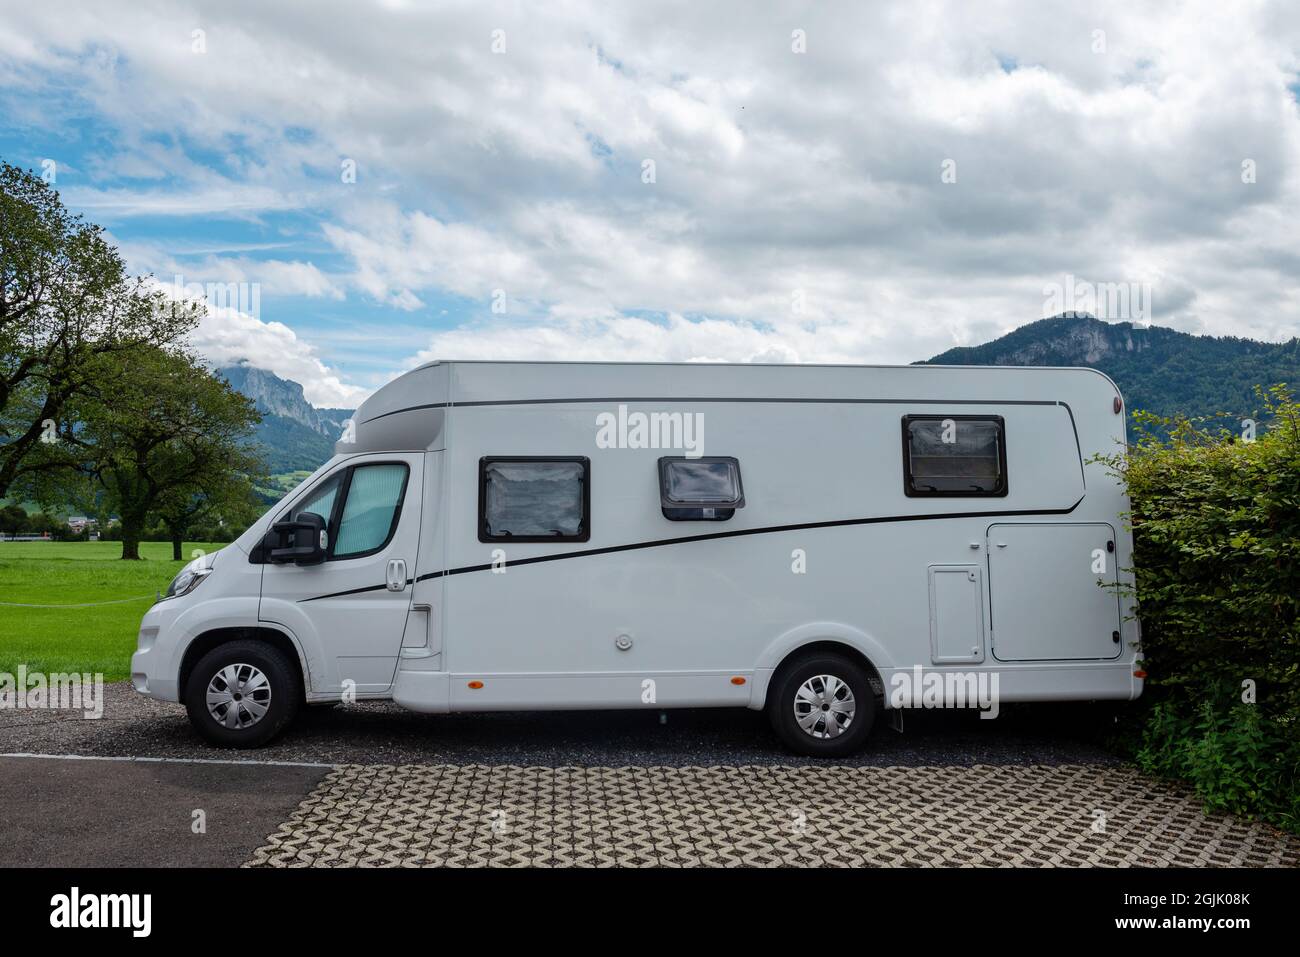 Page 2 - Motorhome In Alps High Resolution Stock Photography and Images -  Alamy